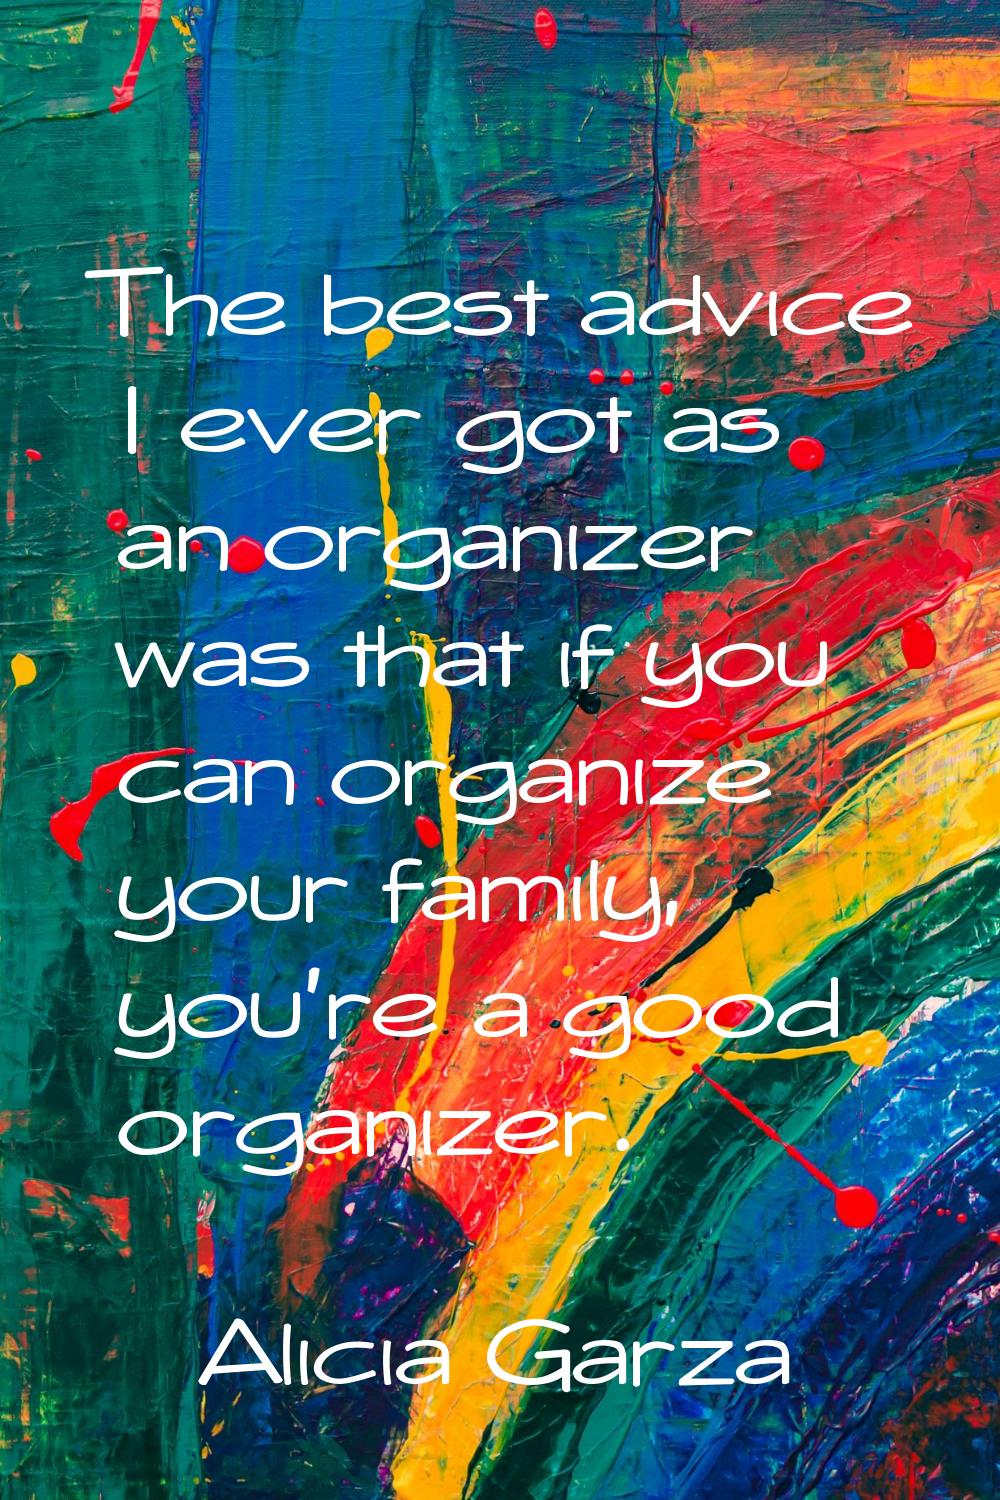 The best advice I ever got as an organizer was that if you can organize your family, you're a good 